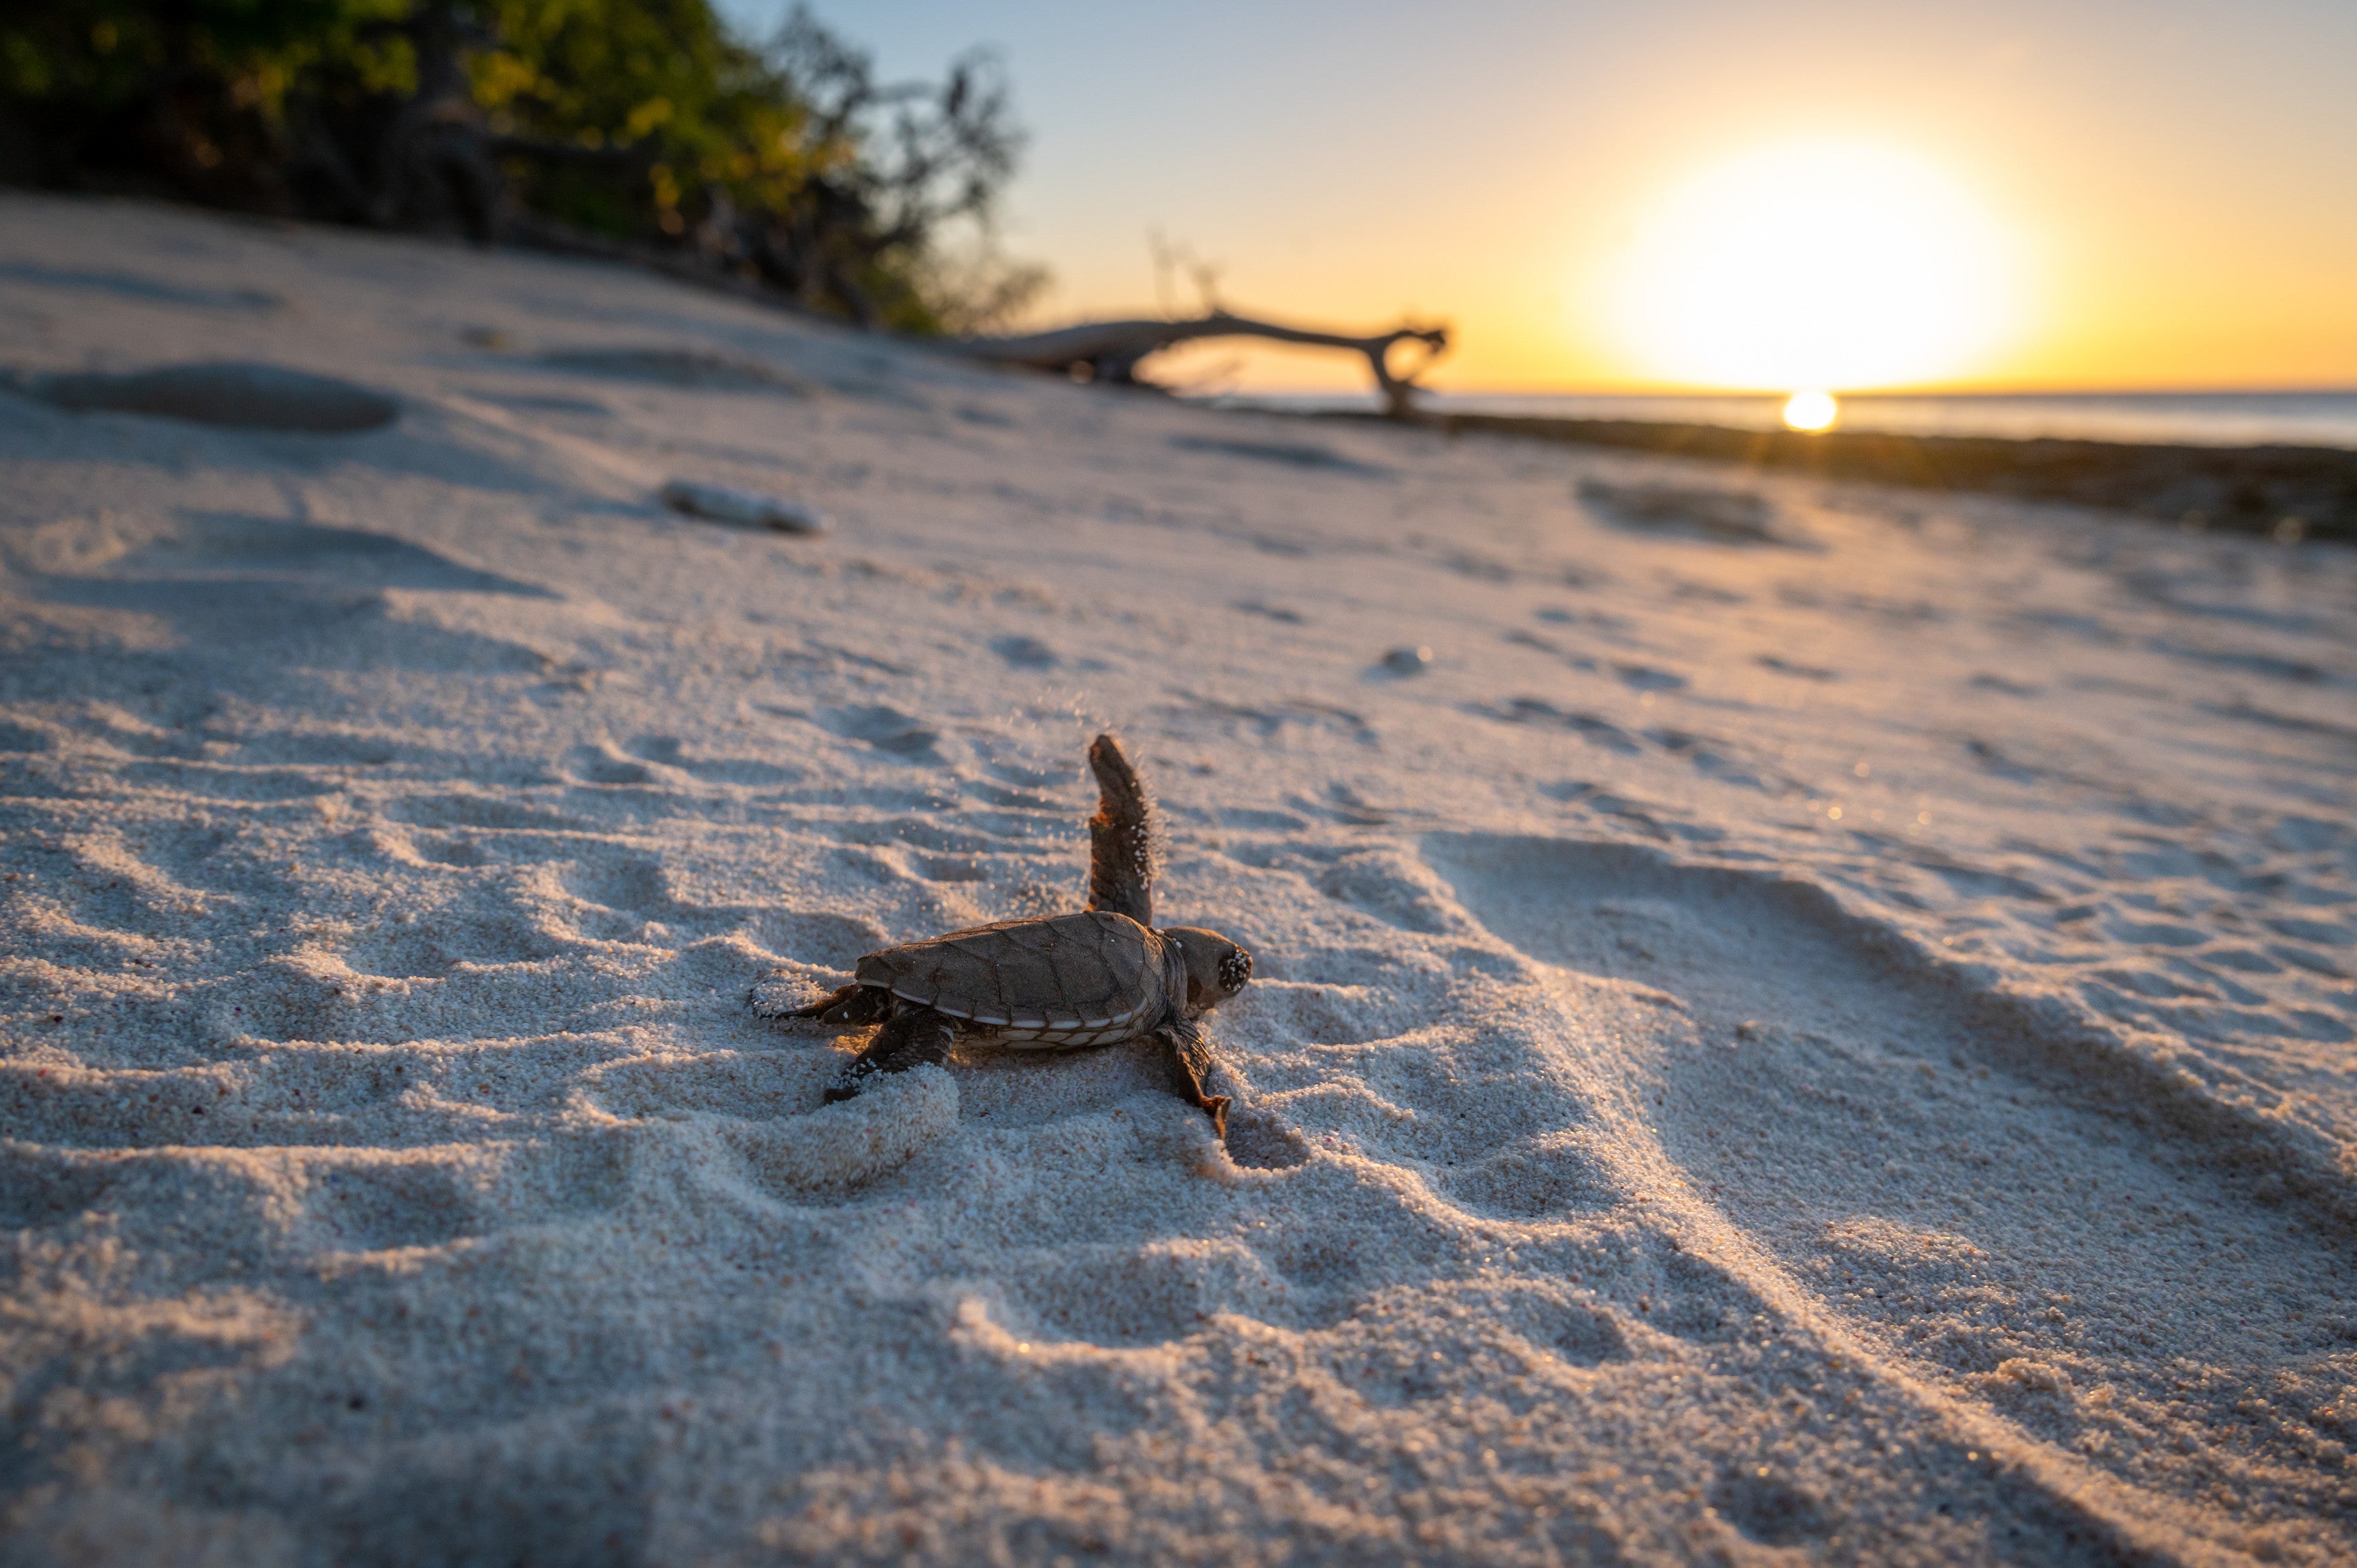 A baby turtle makes its way from the beach to the water